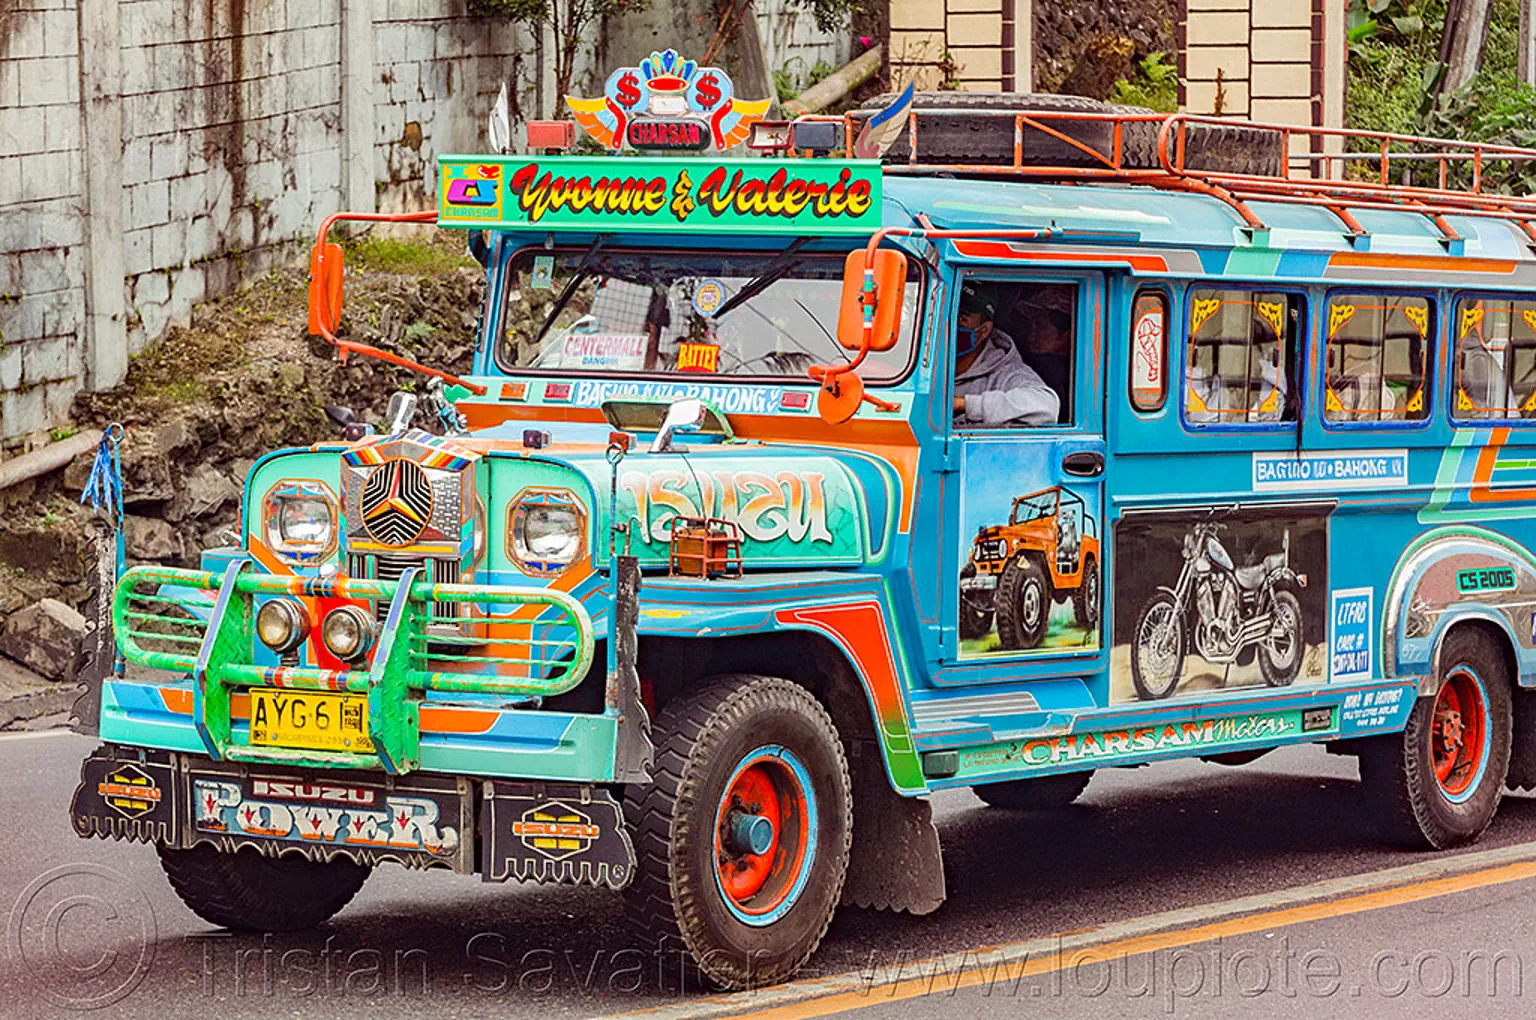 blue and green jeepney (philippines), baguio, colorful, decorated, front grill, jeepney, painted, philippines, road, truck